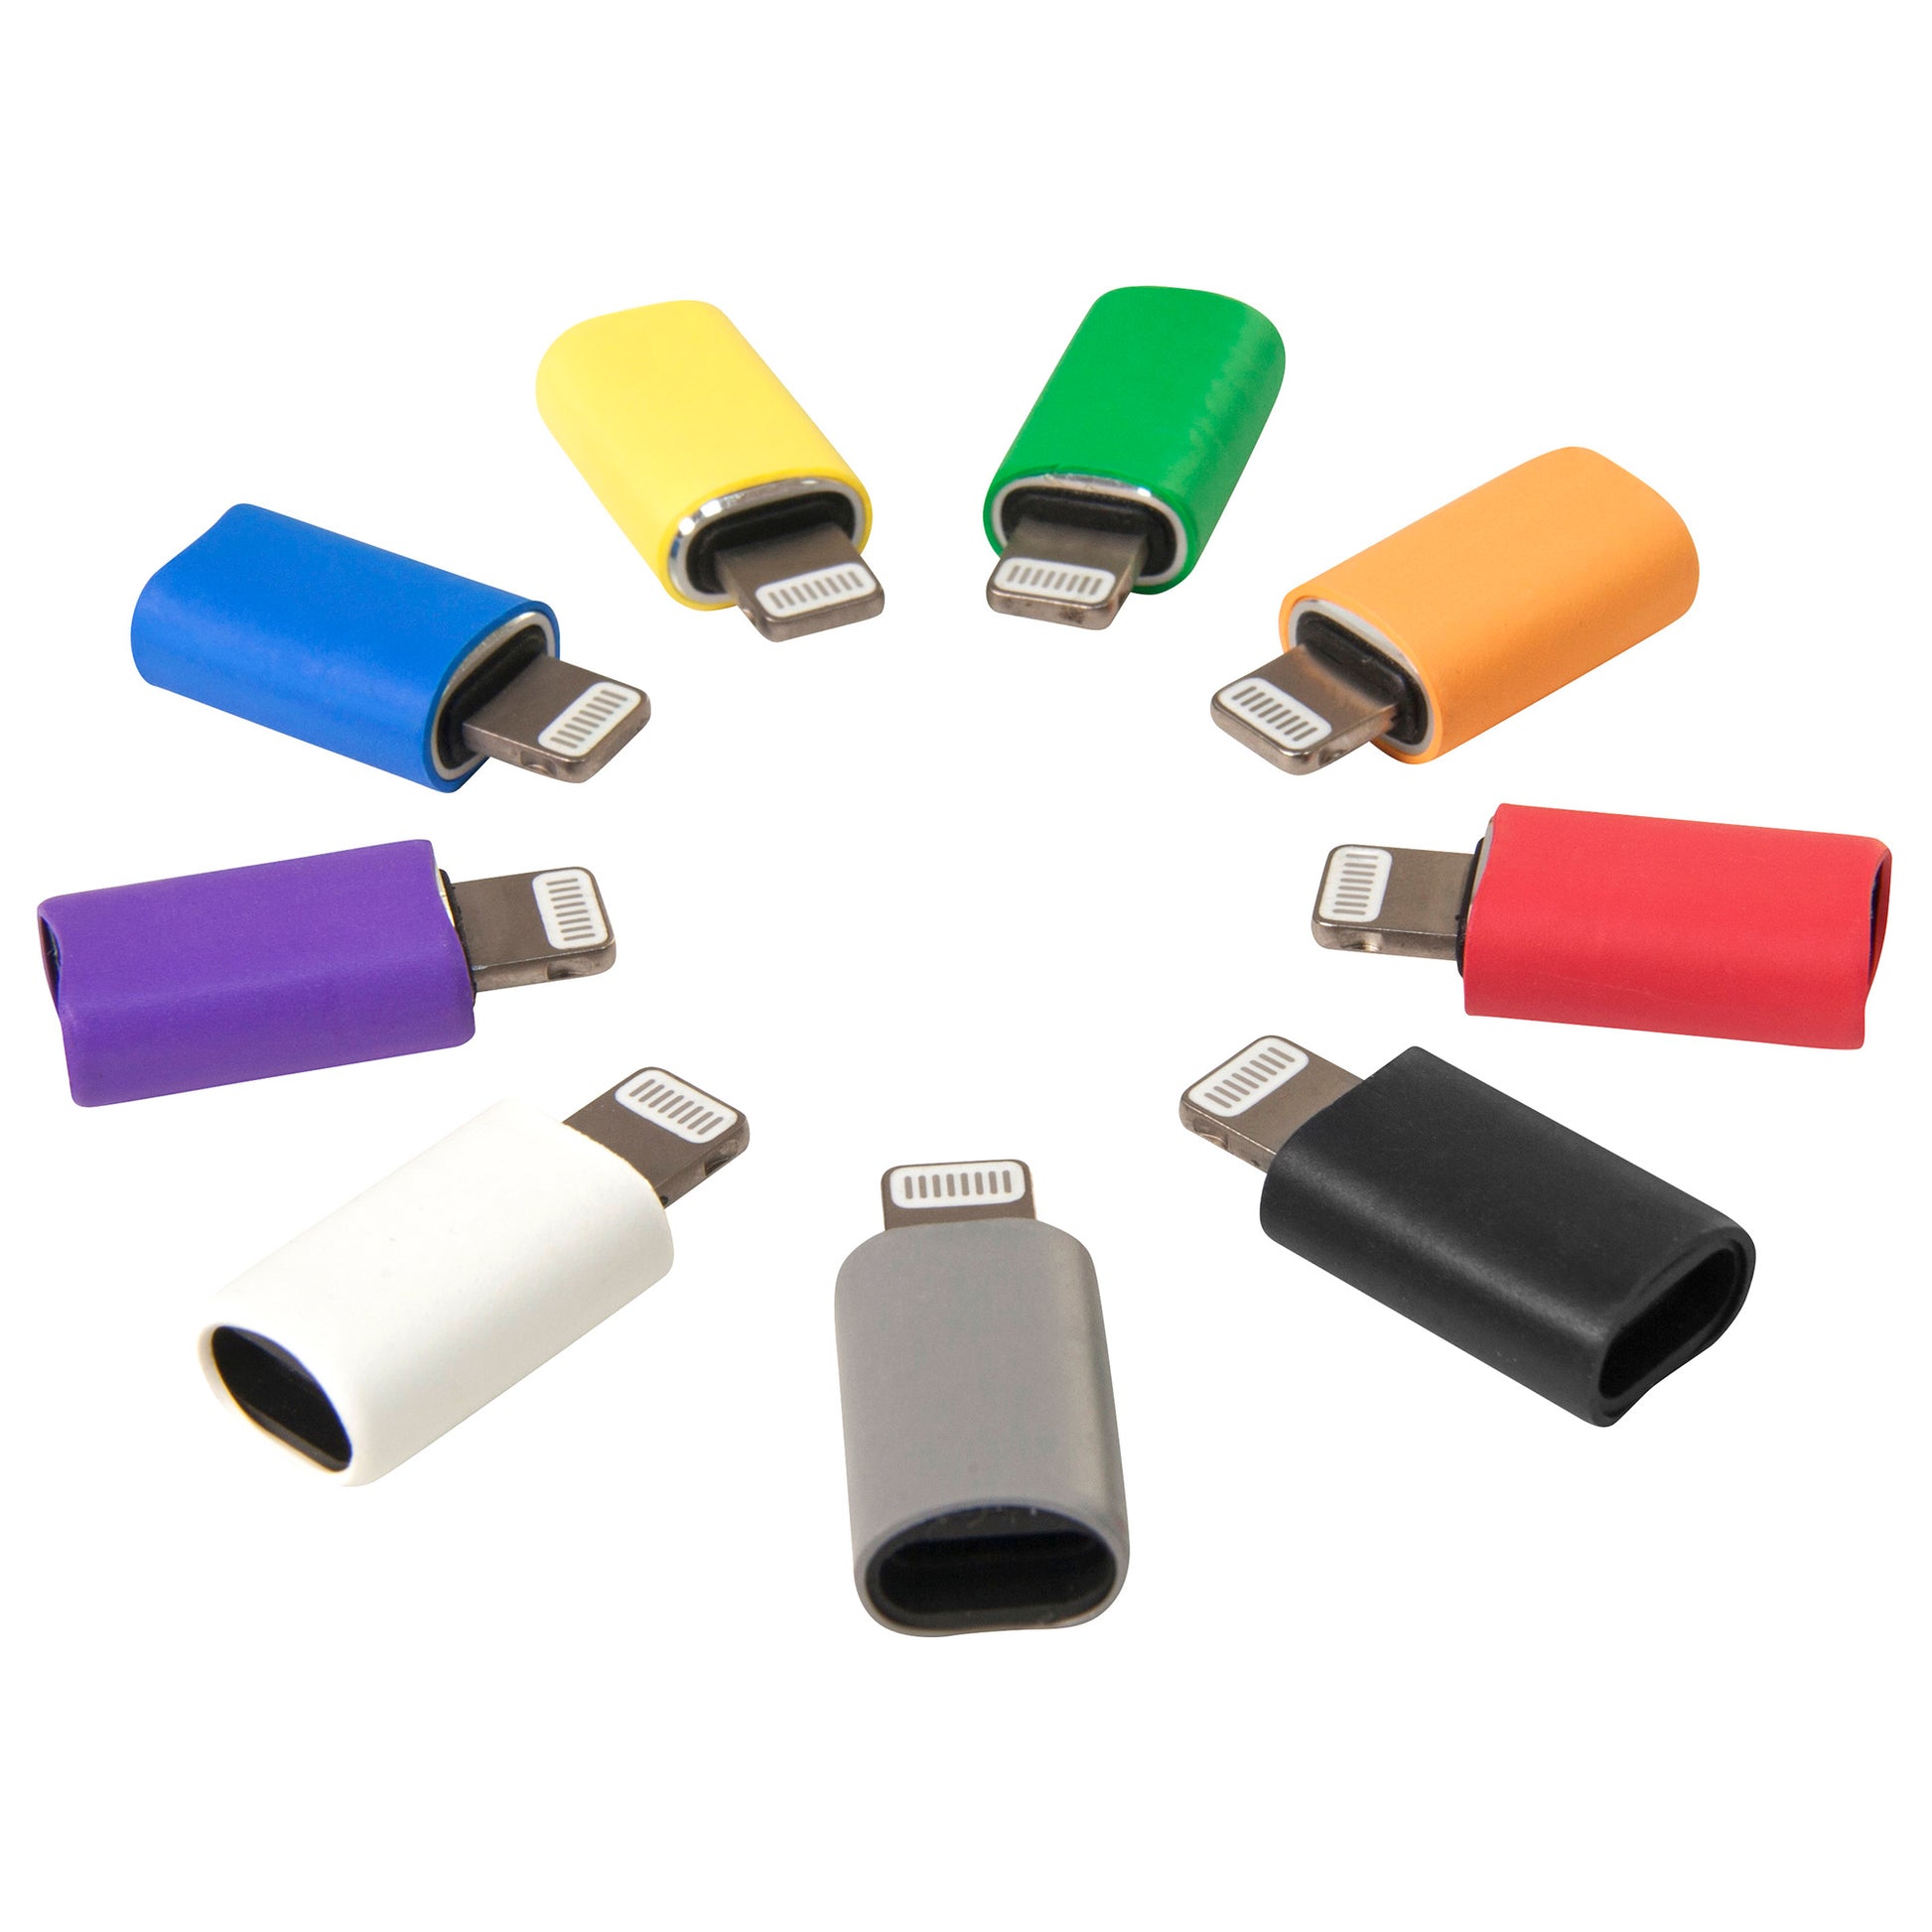 USB C Adapter Lightning  spare parts for charging cables